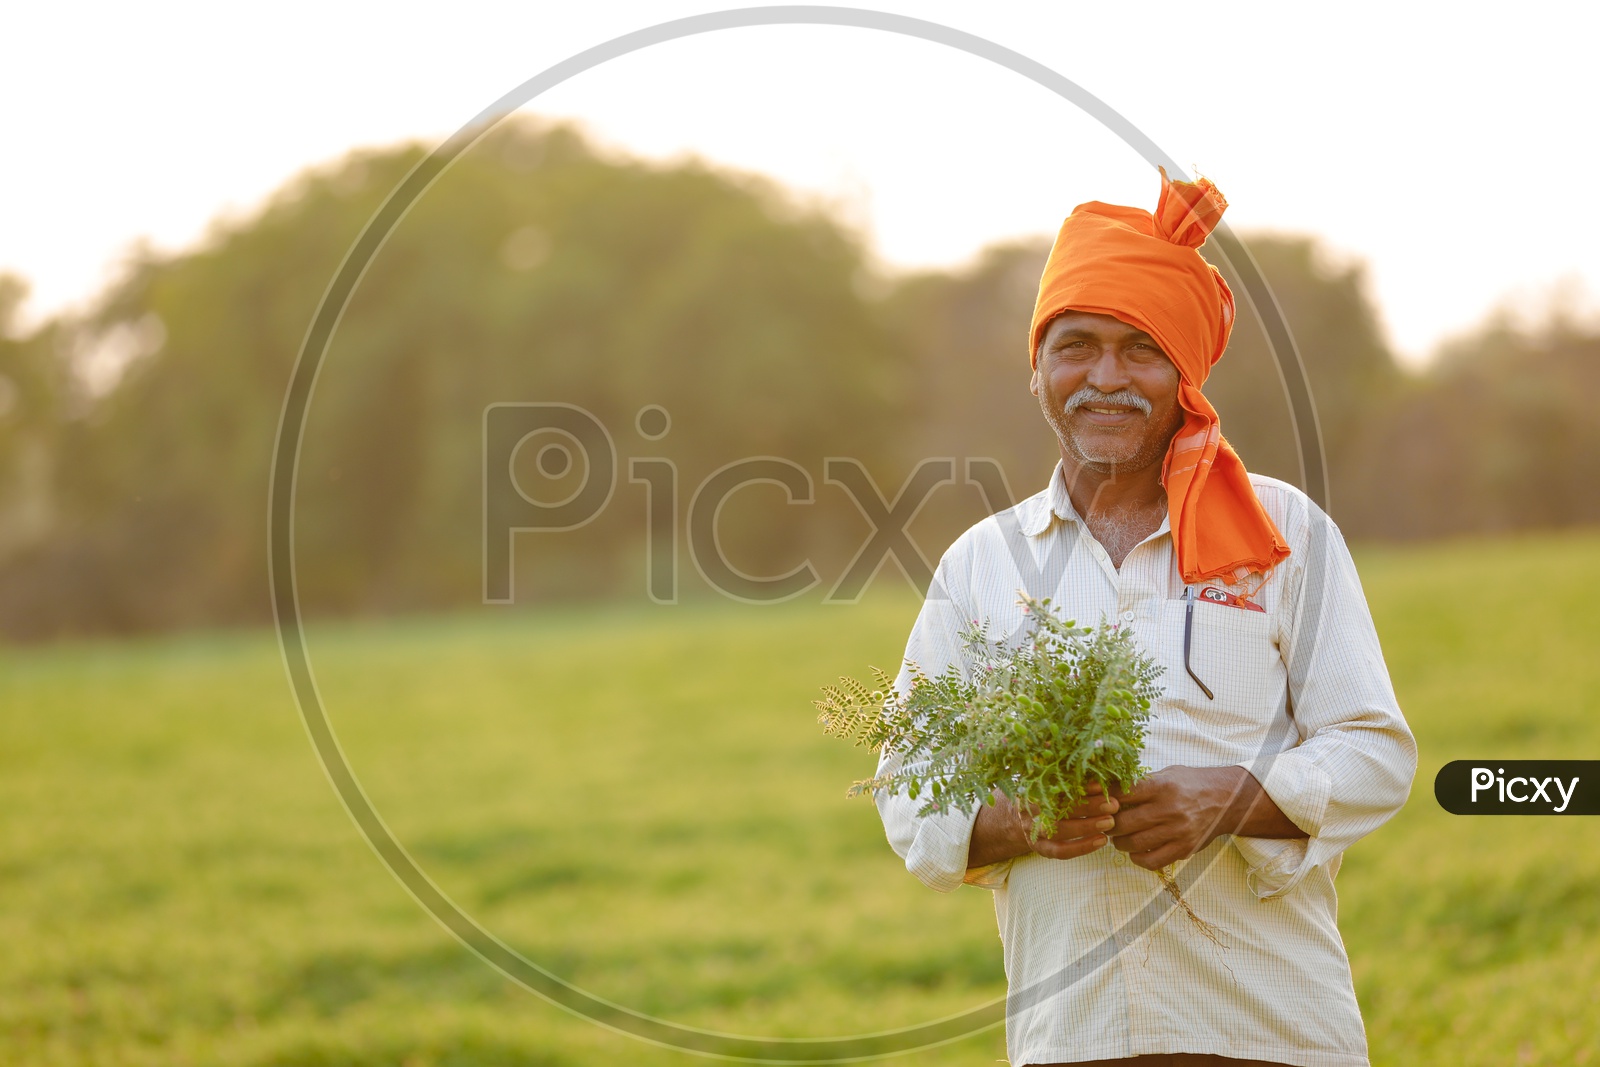 Indian Farmer Showing Chickpea Plants With Happy Smiling Face  in Agricultural Field